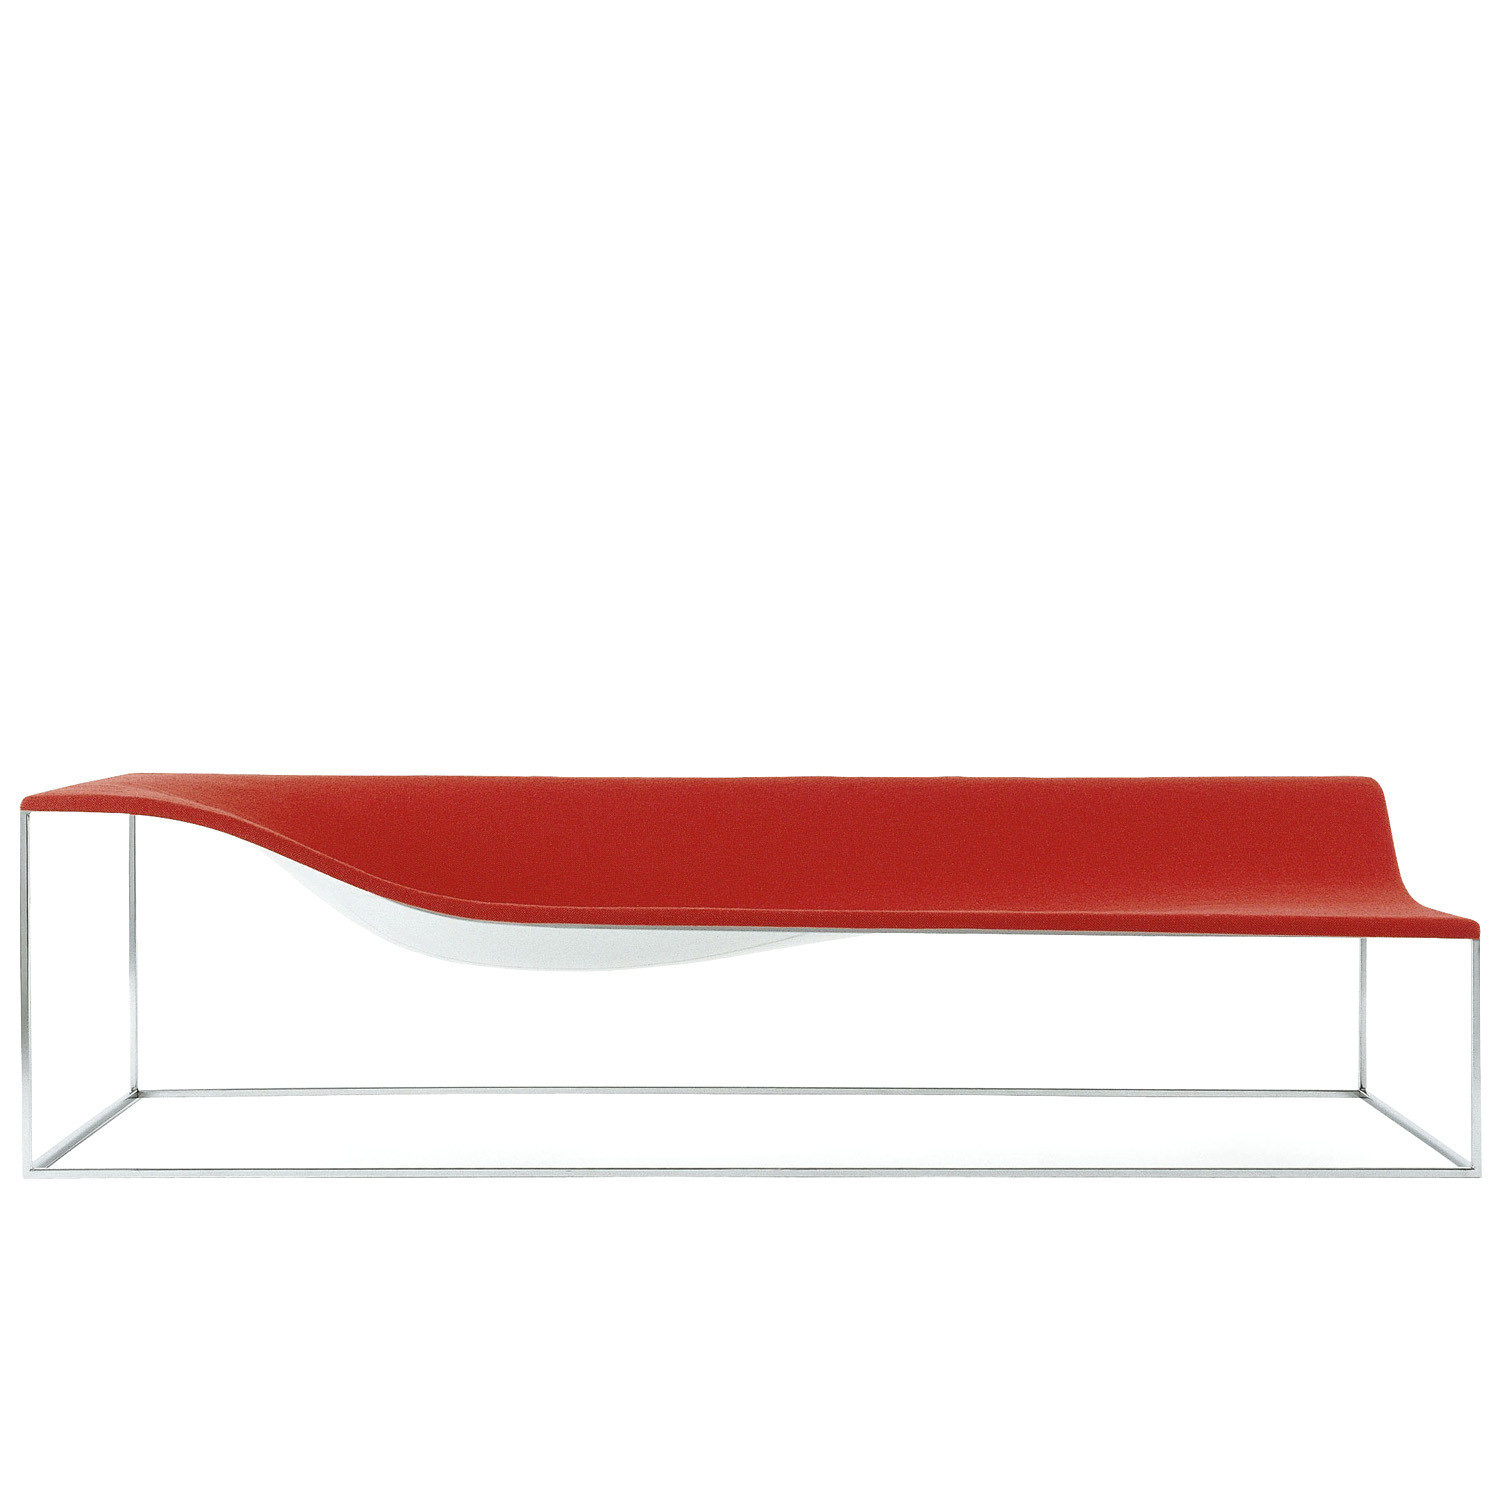 Outline Chaise Longue by Cappellini